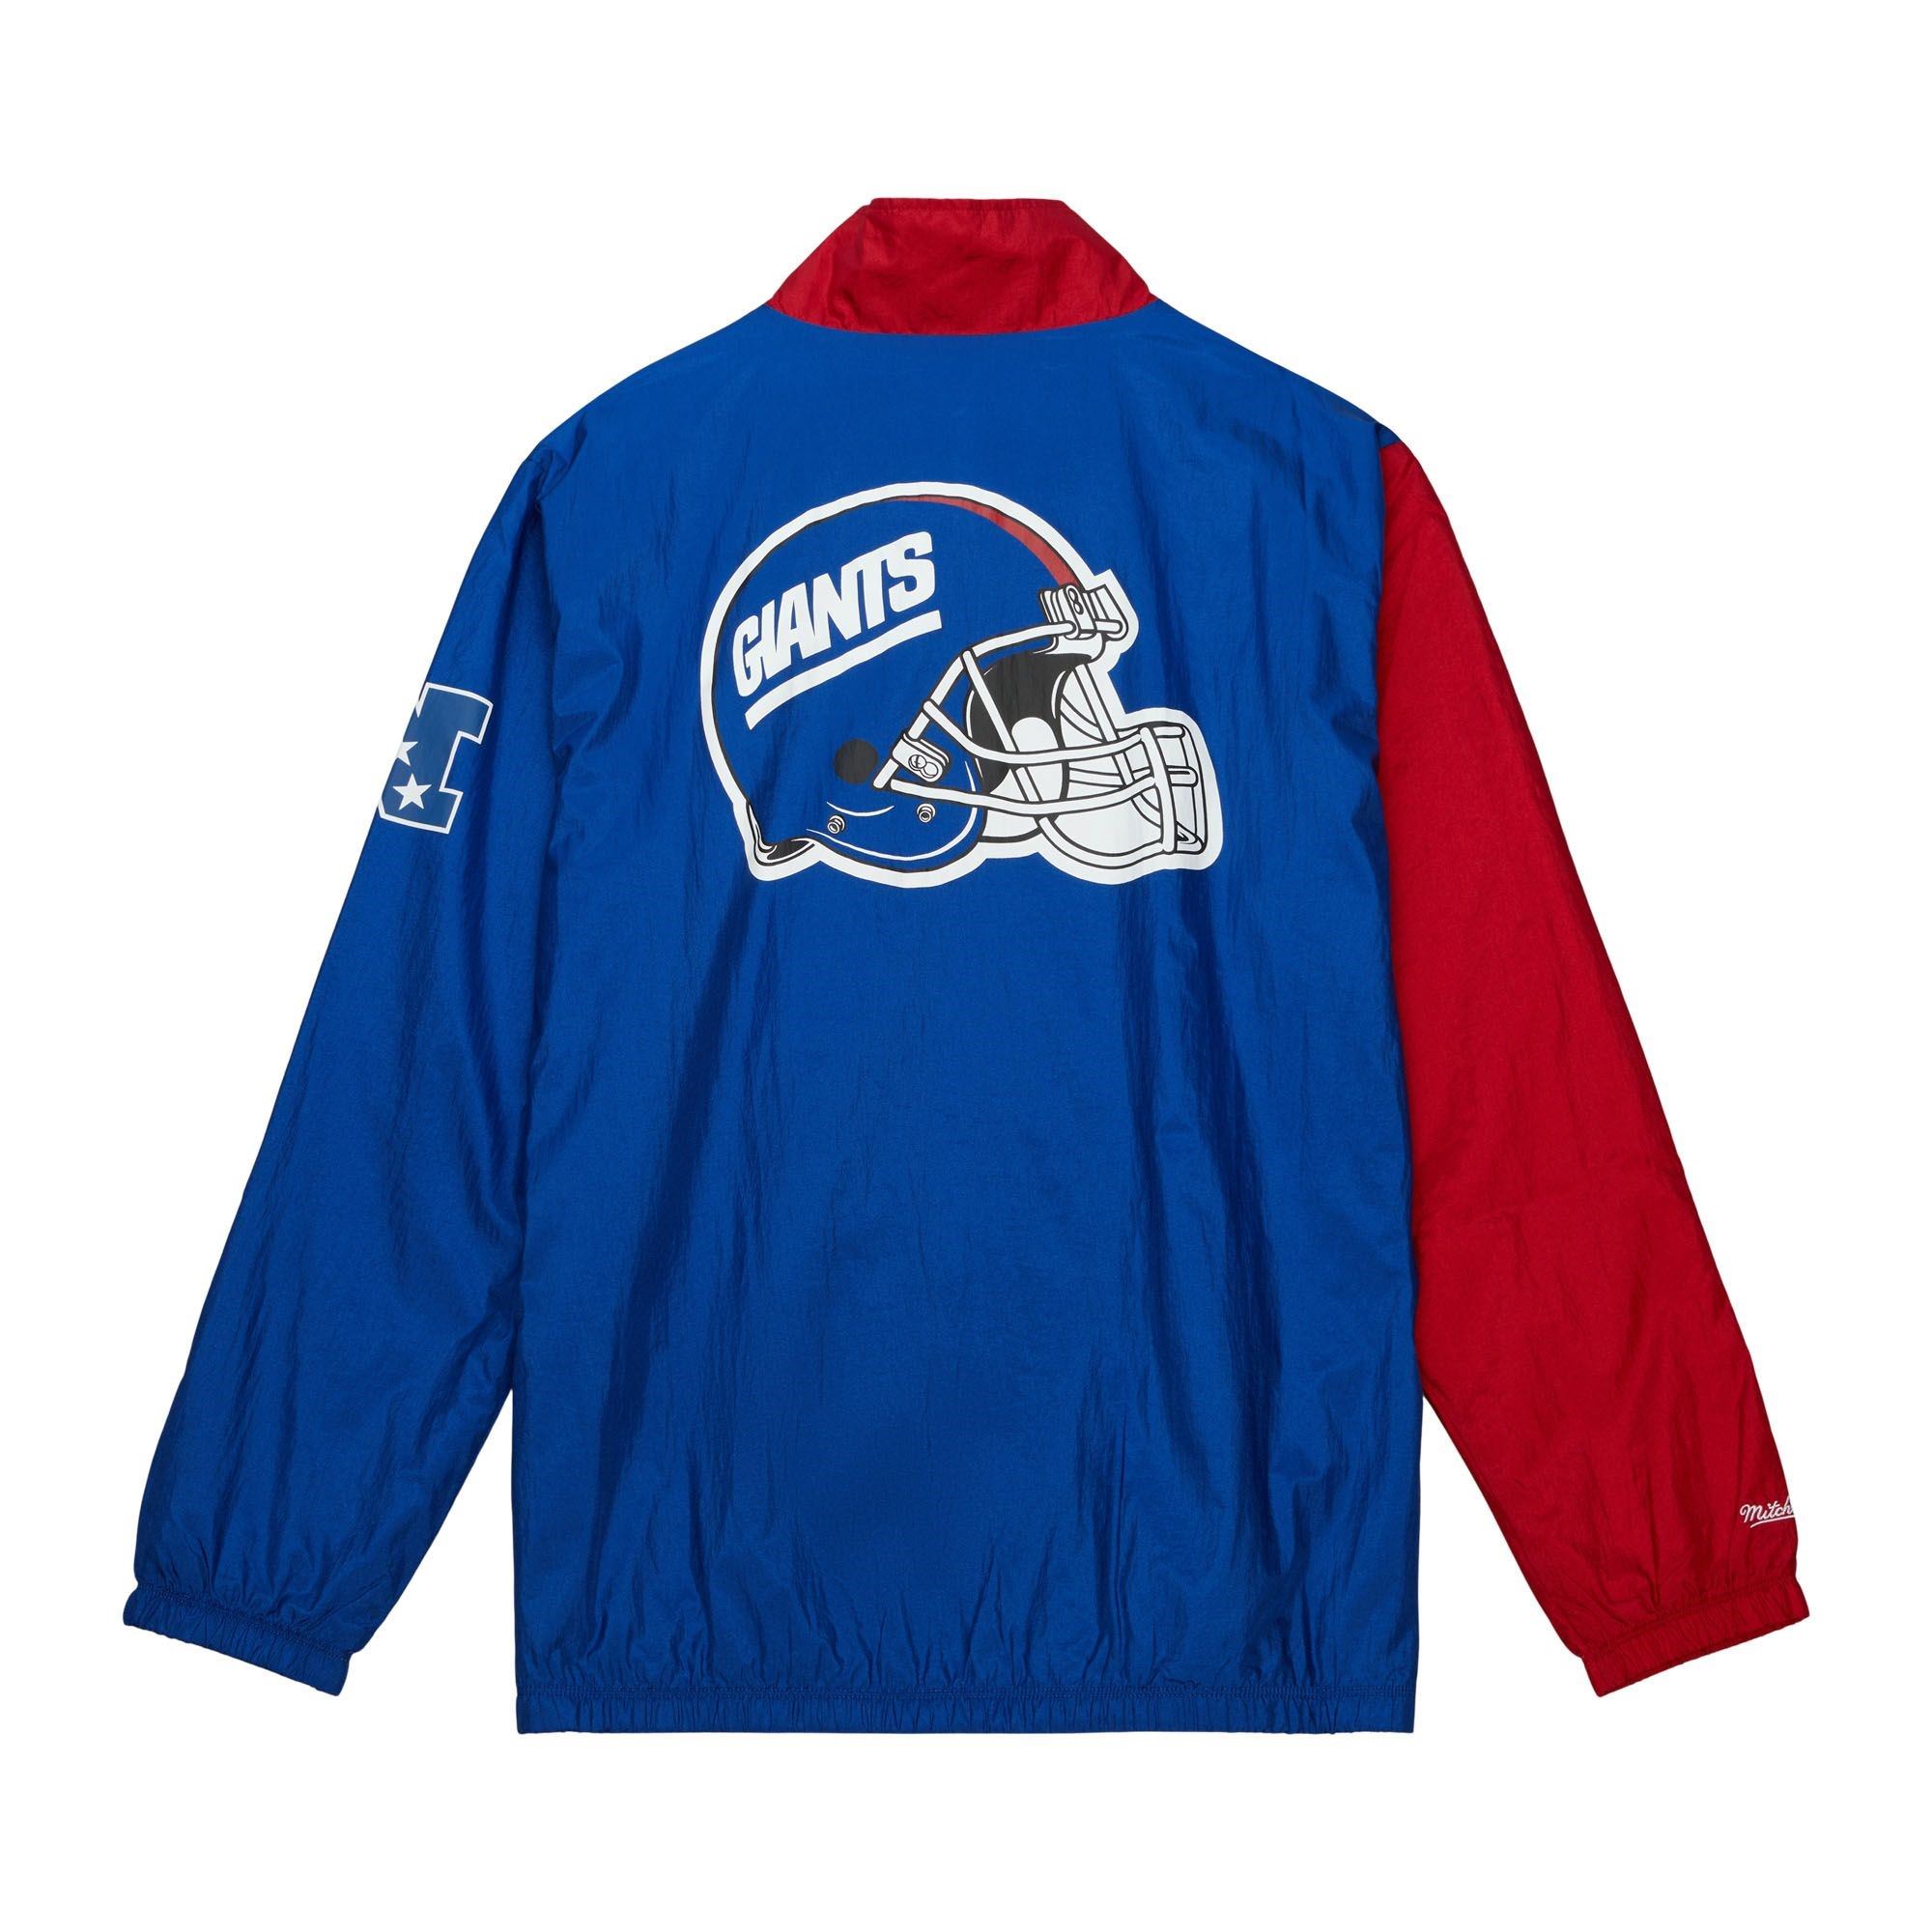 New York Giants NFL Arched Retro Lined Windbreaker Blue Red Jacke Mitchell & Ness